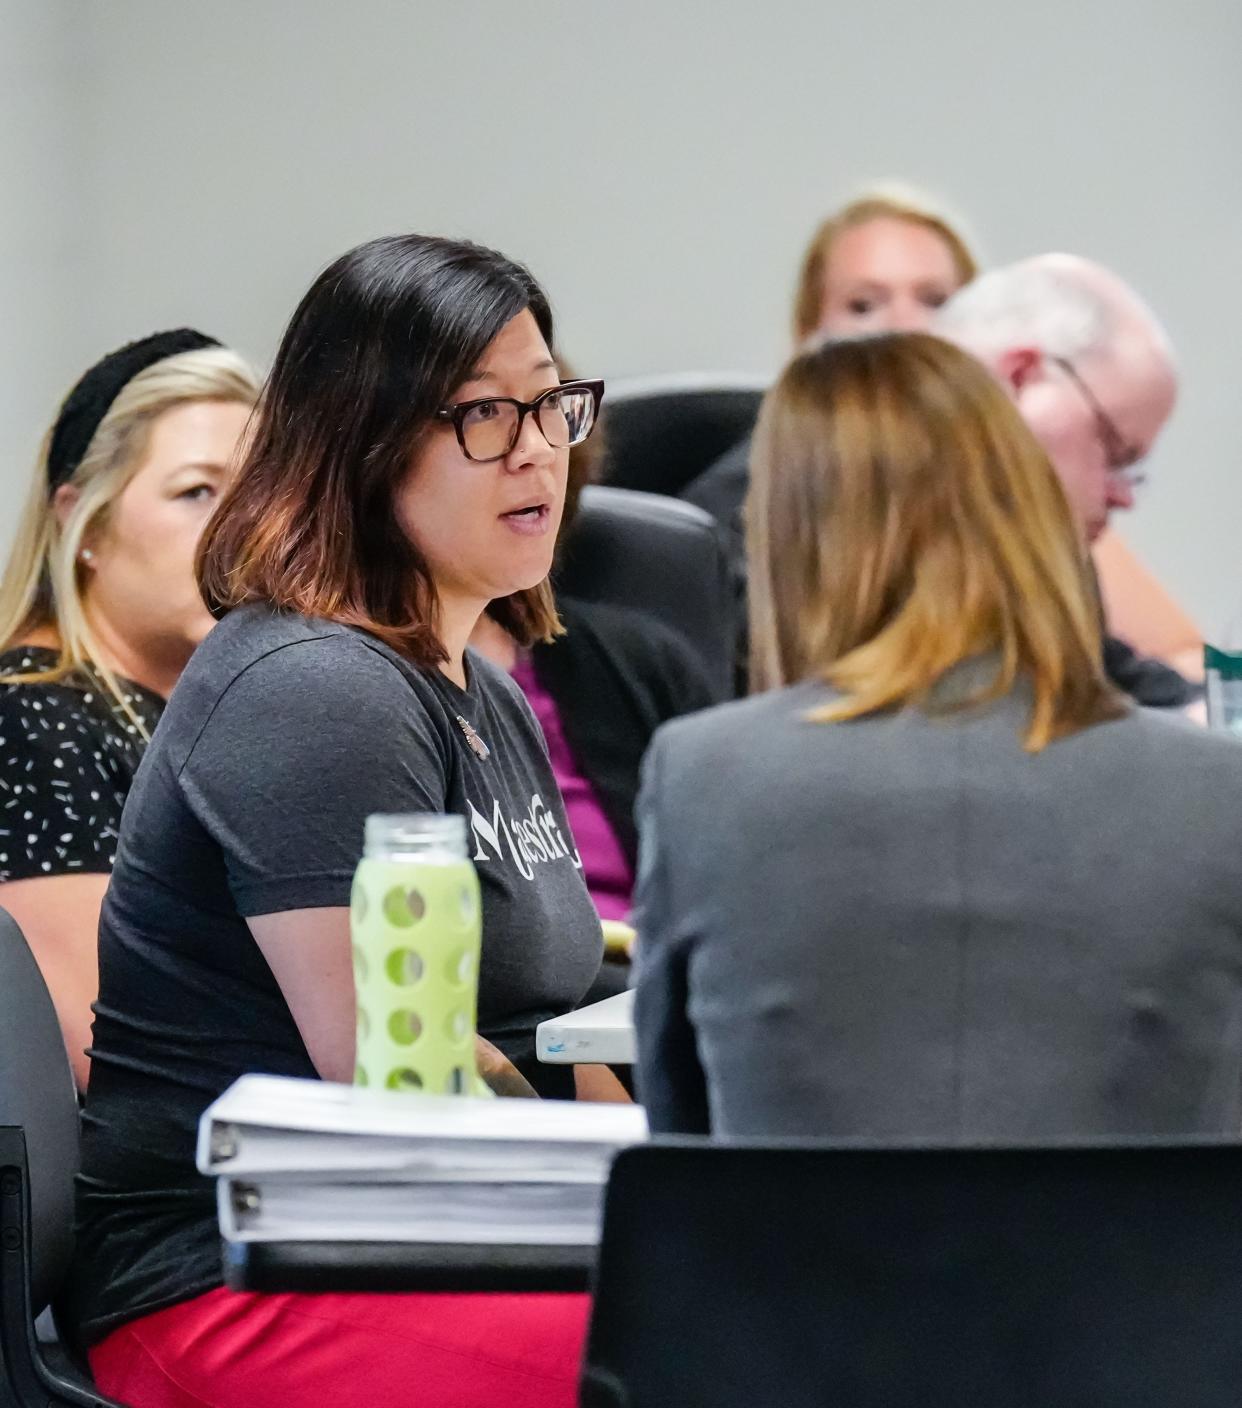 Heyer Elementary School teacher Melissa Tempel testifies during a Waukesha School Board termination hearing on July 12. Waukesha School District superintendent James Sebert recommended Tempel be fired for a tweet criticizing the district's decision to ban the Miley Cyrus and Dolly Parton song "Rainbowland."